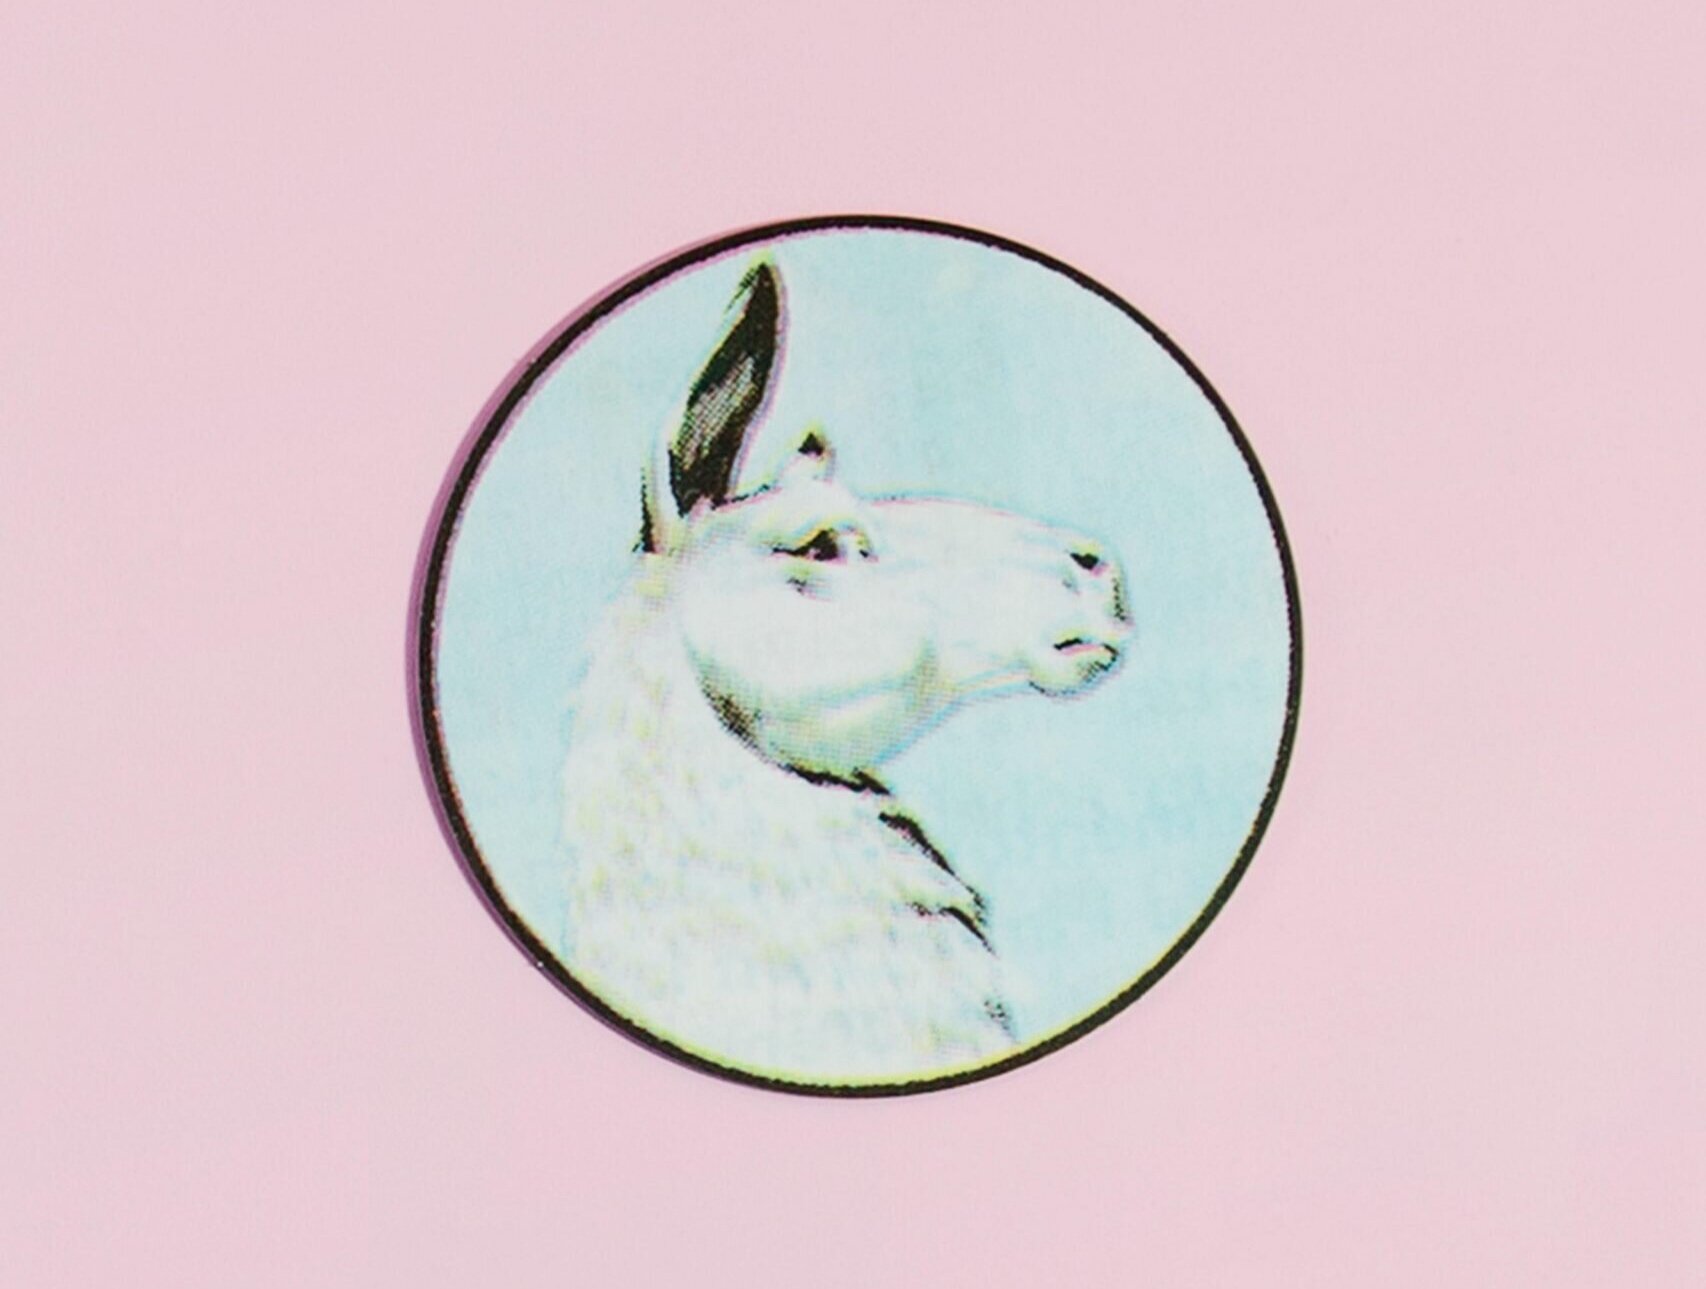   Llama  - Claudia Martinez Garay  Picture by The Grimm Gallery 